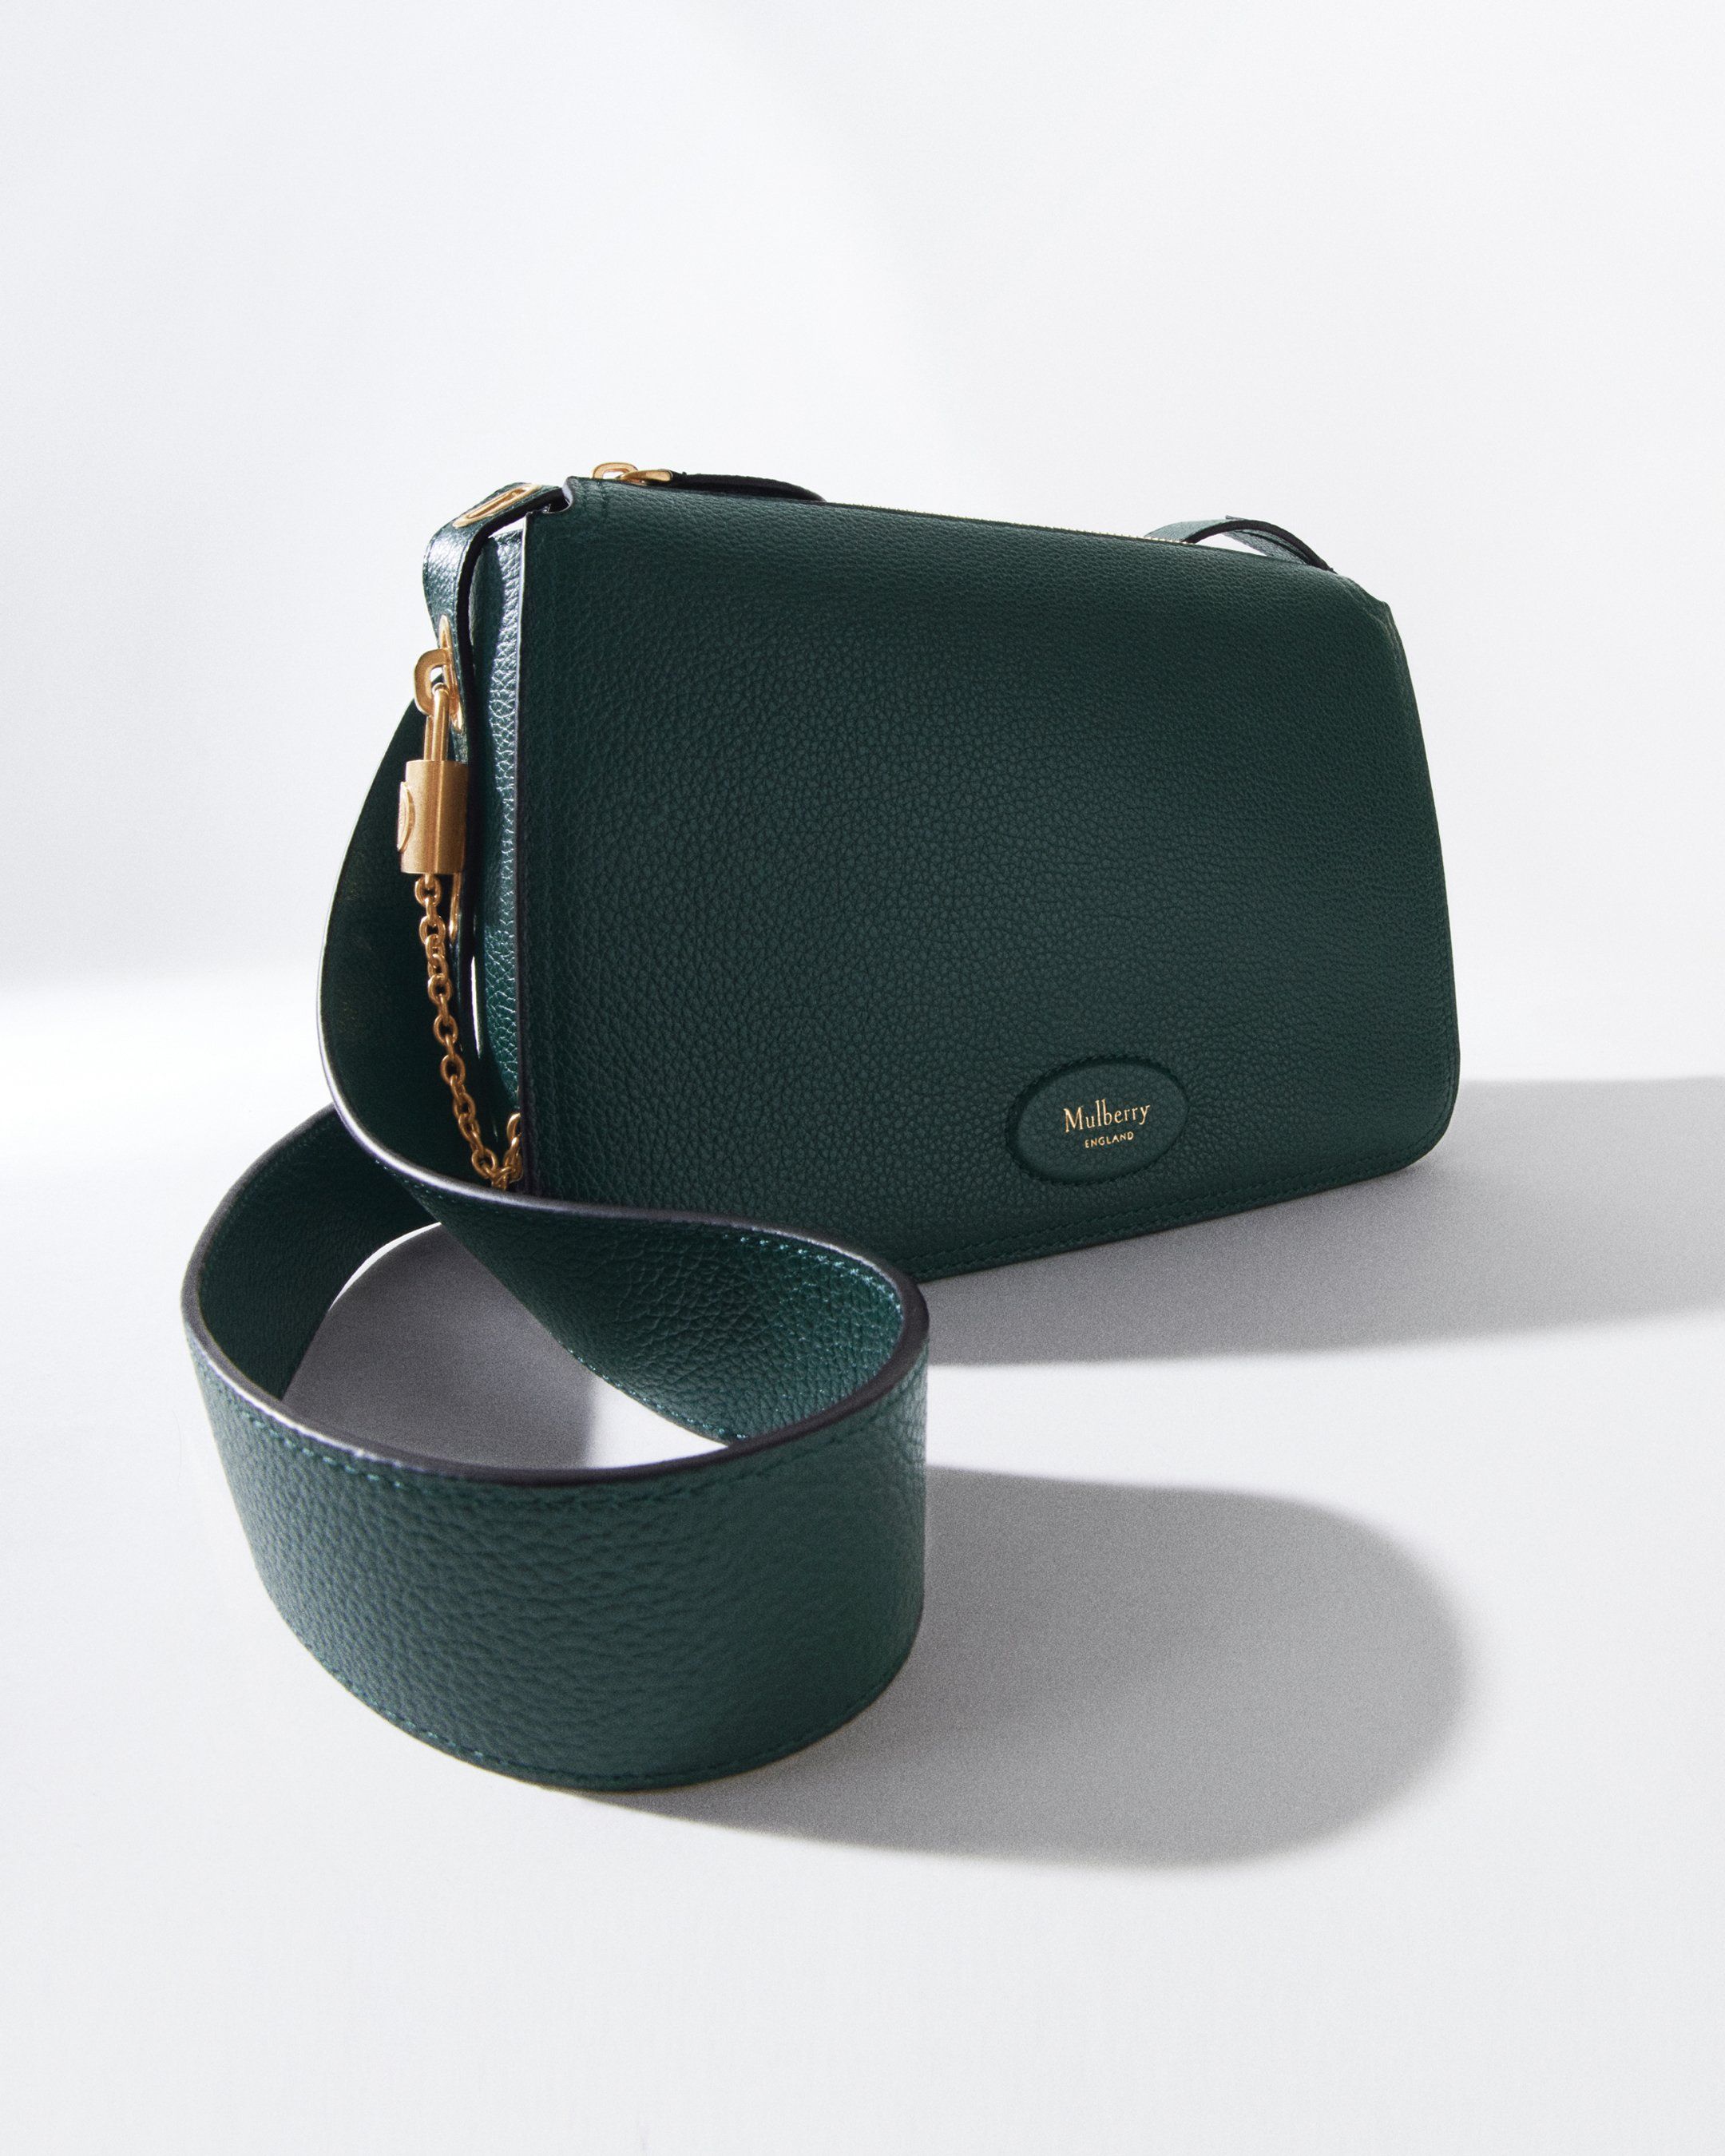 Mulberry Billie bag in green leather